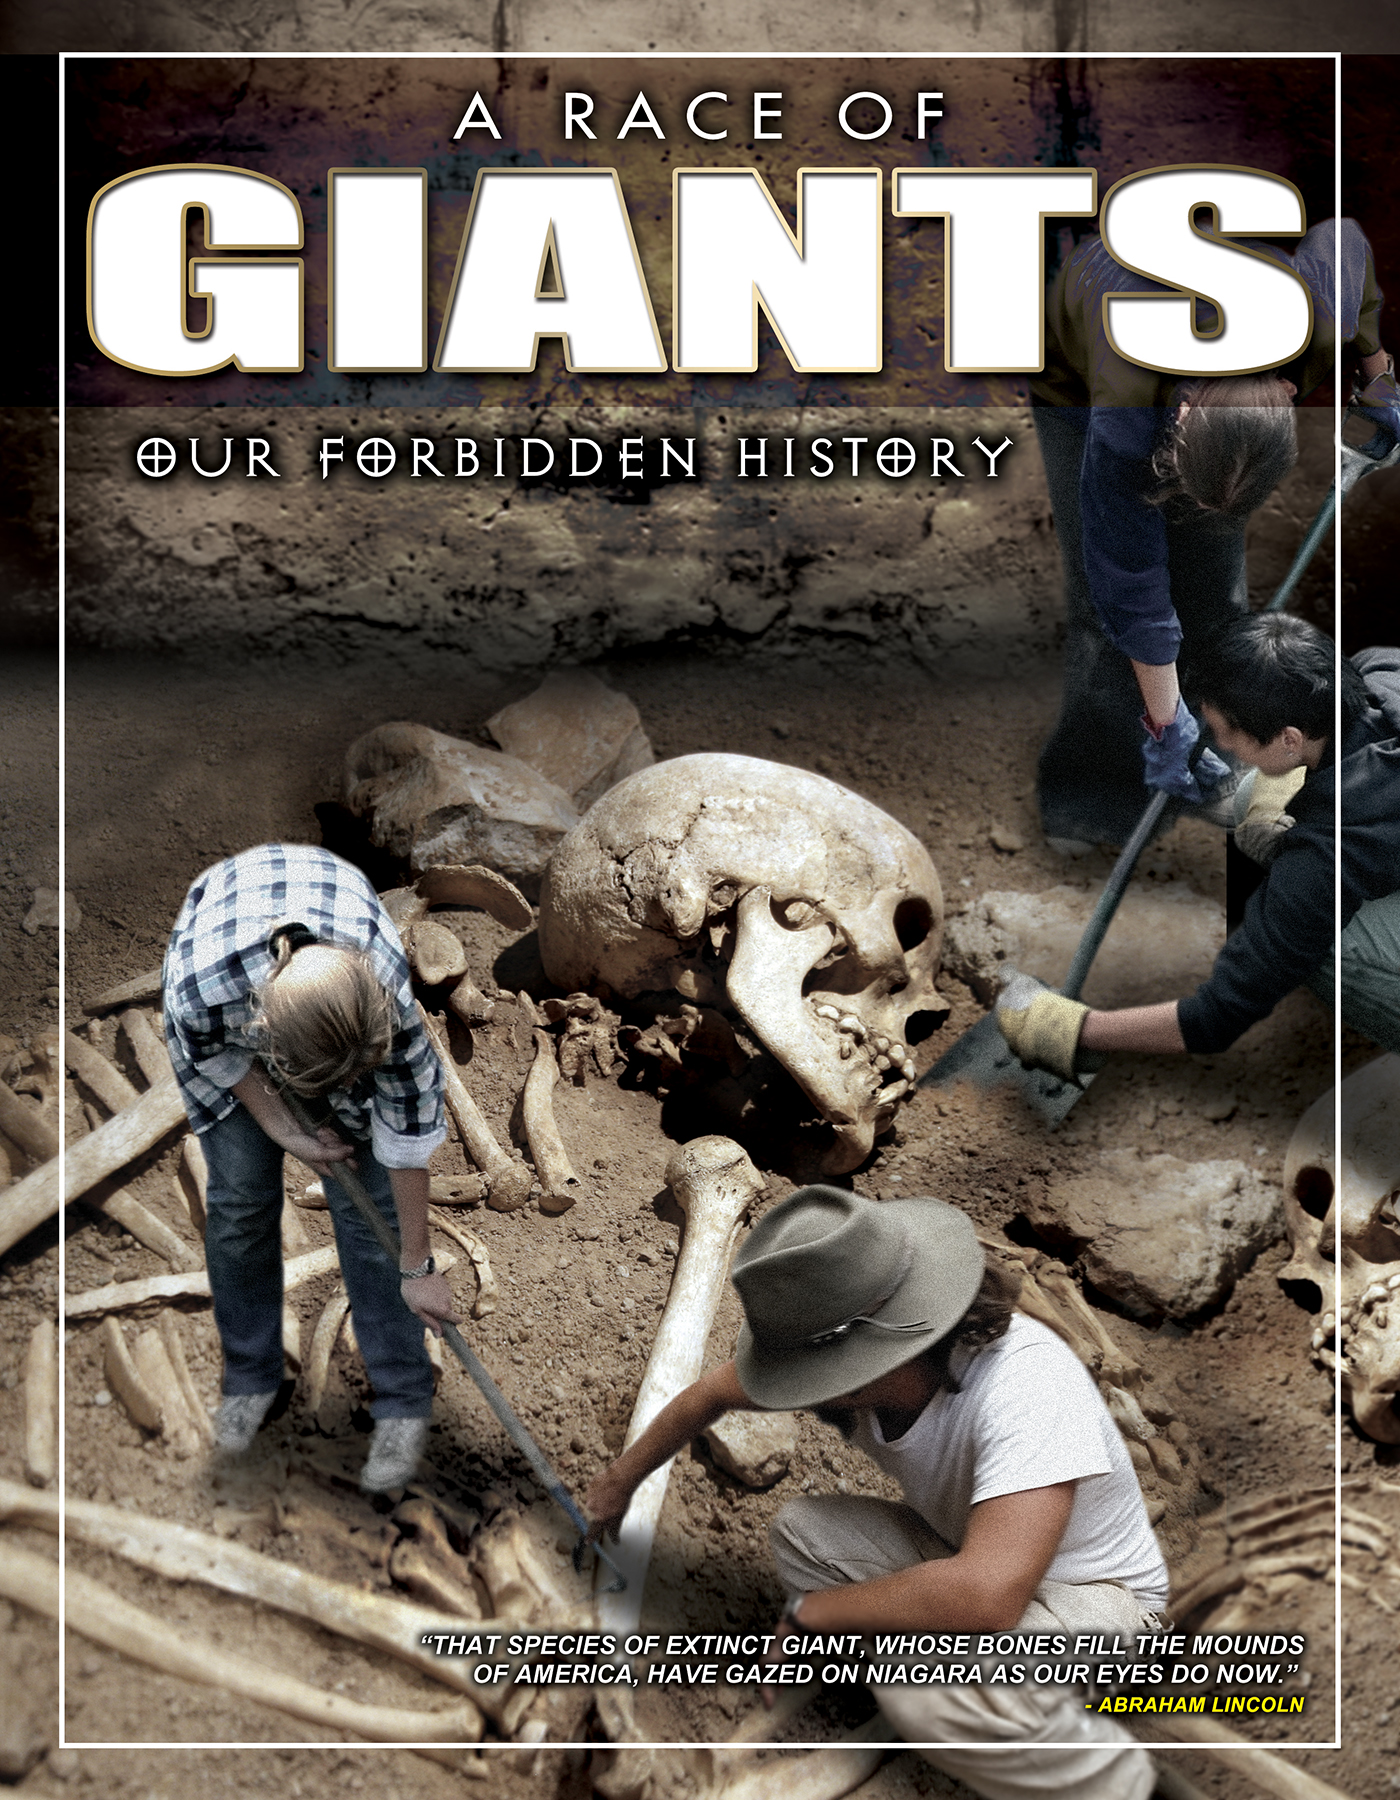 A Race of Giants: Our Forbidden History (2015) starring Paul Hughes on DVD on DVD